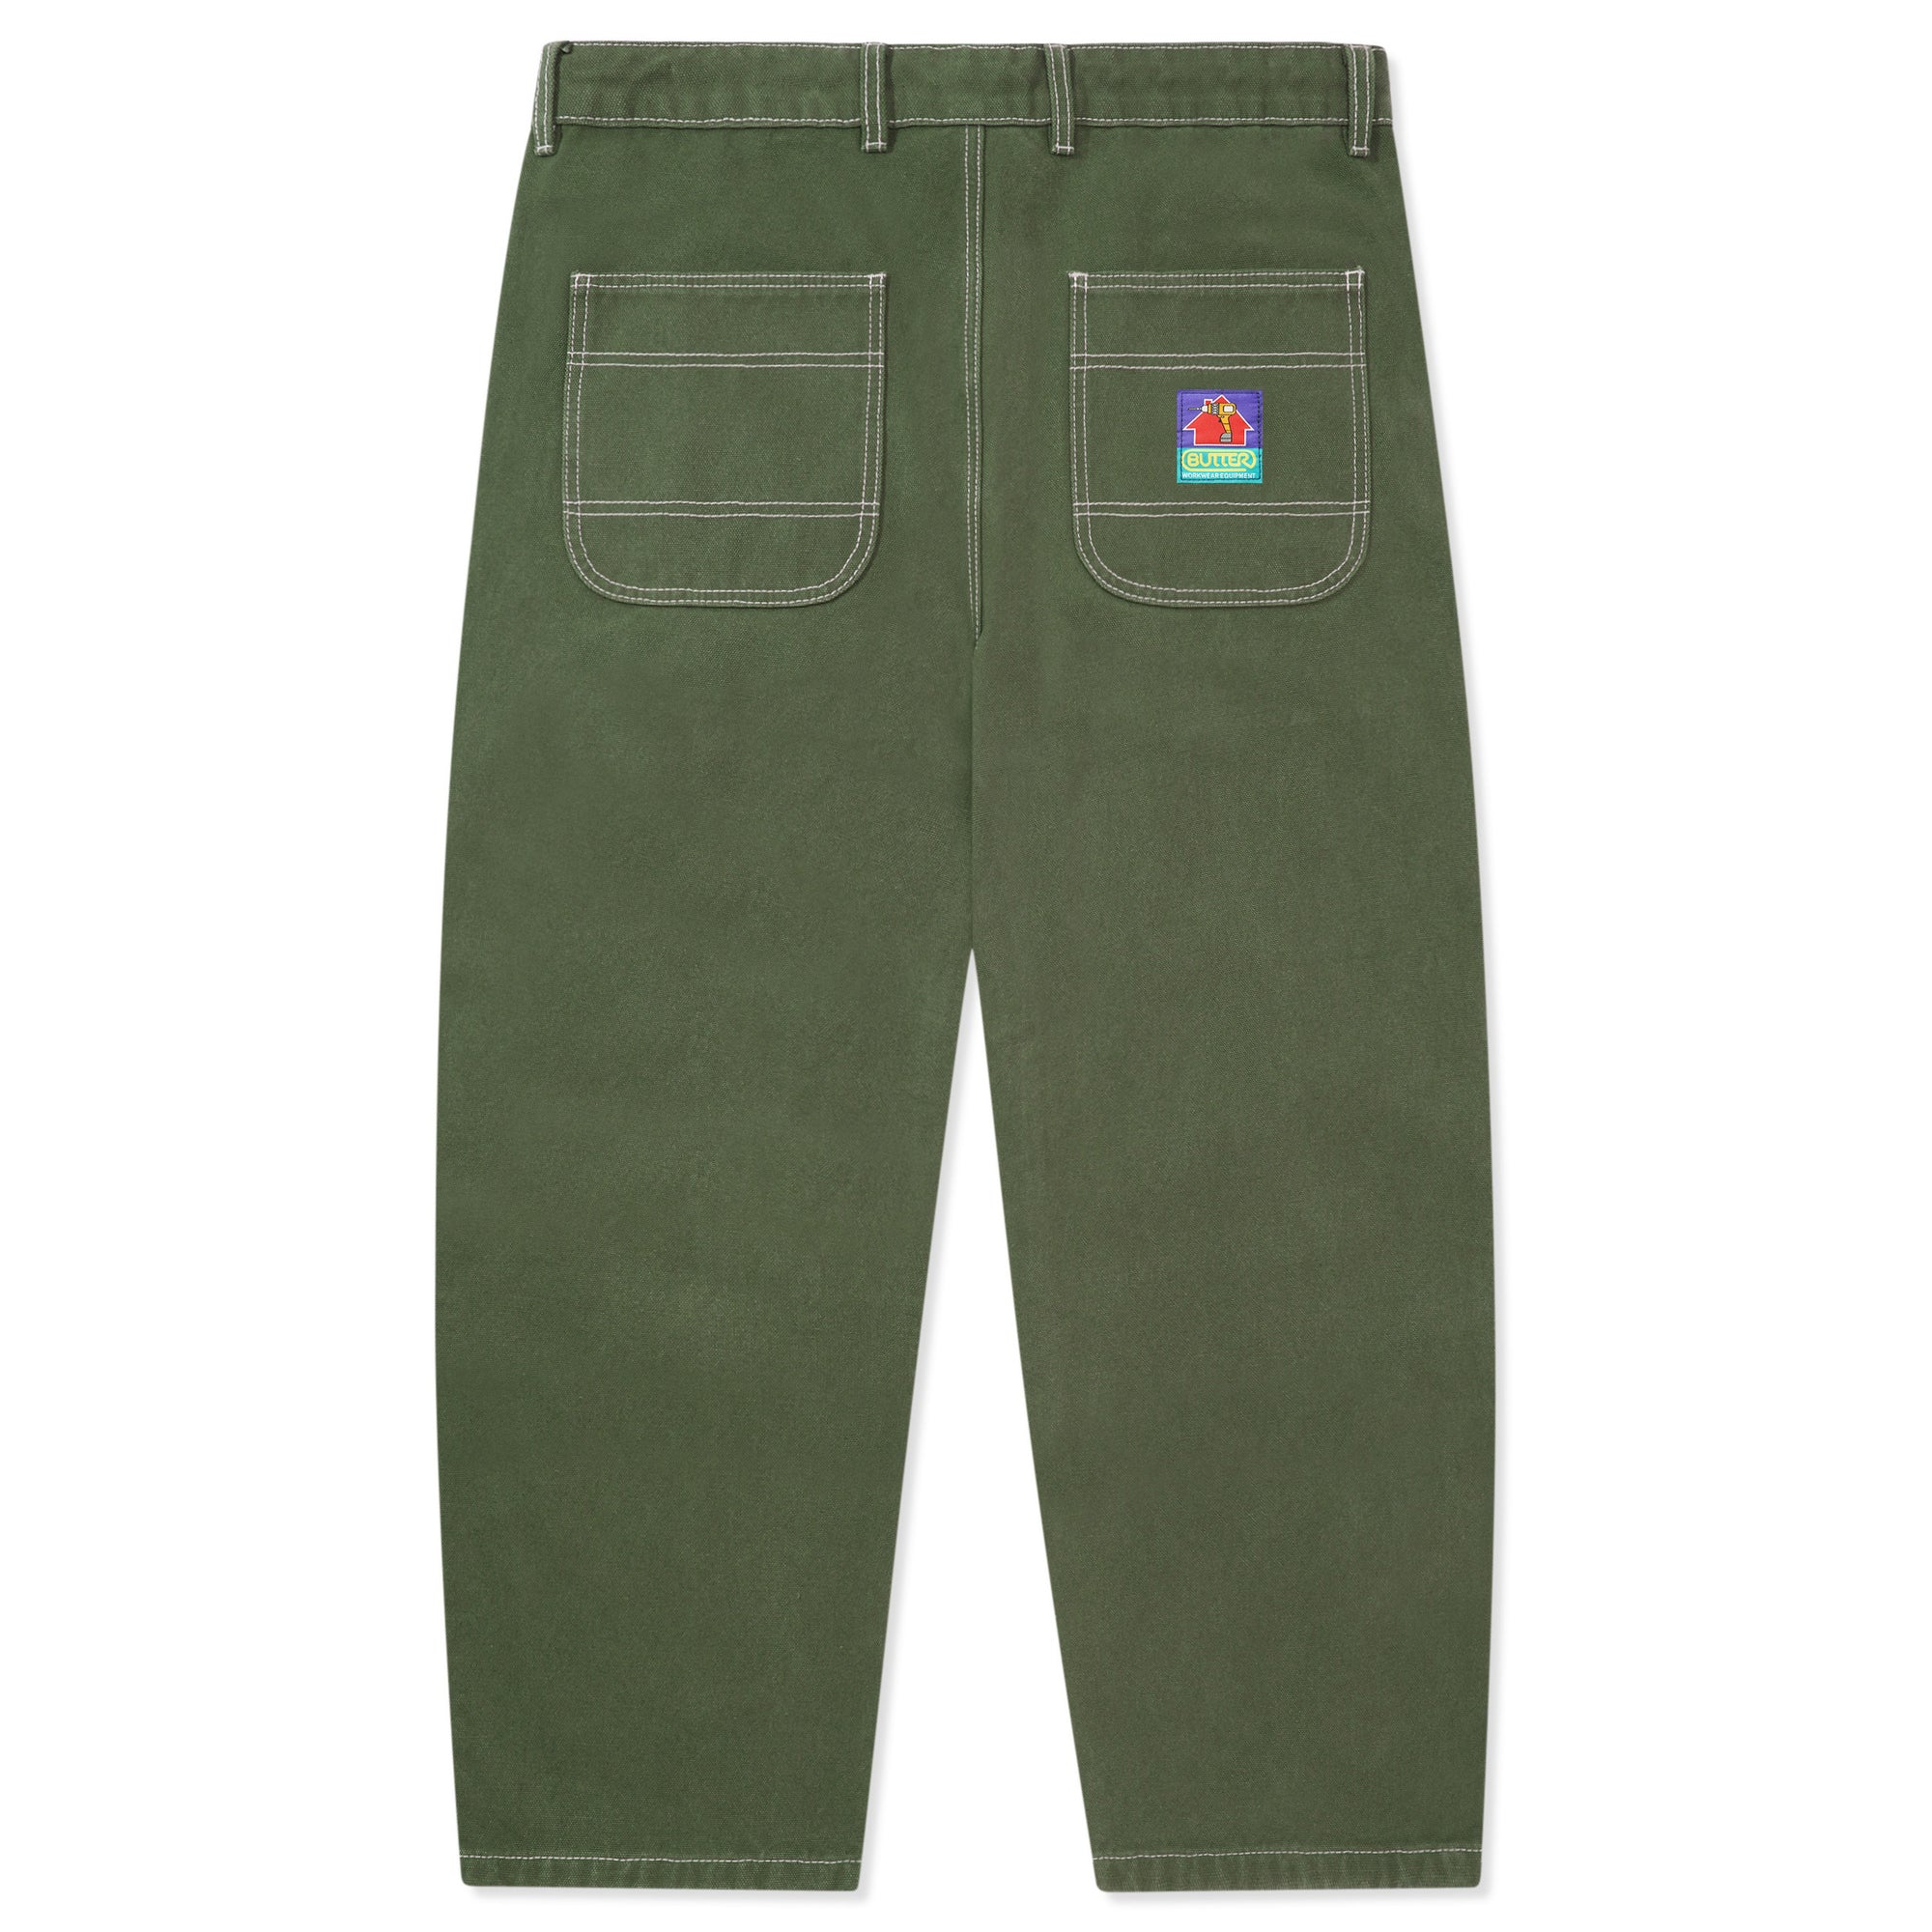 Butter Goods Work Double Knee Pants Washed Army